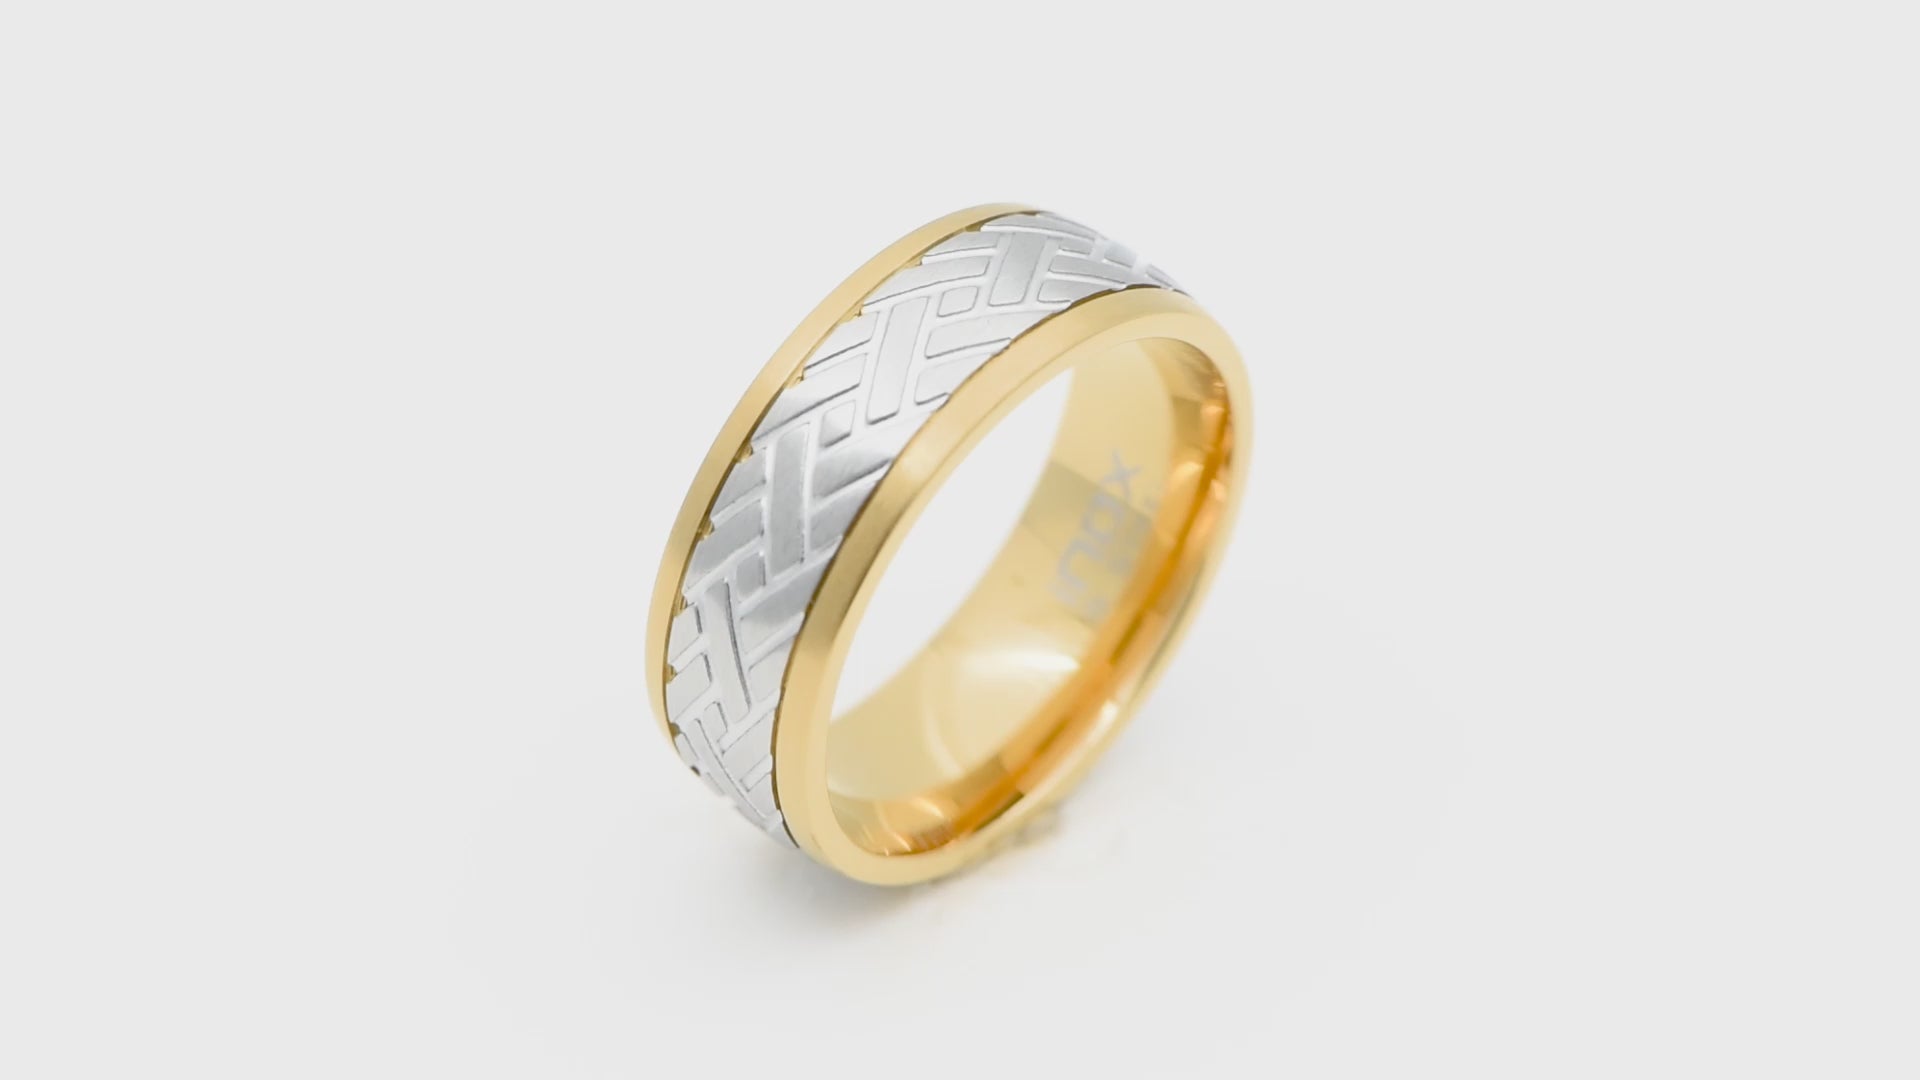 Golden and Silver Tone Stainless Steel Weave Pattern Inlaid Band Ring